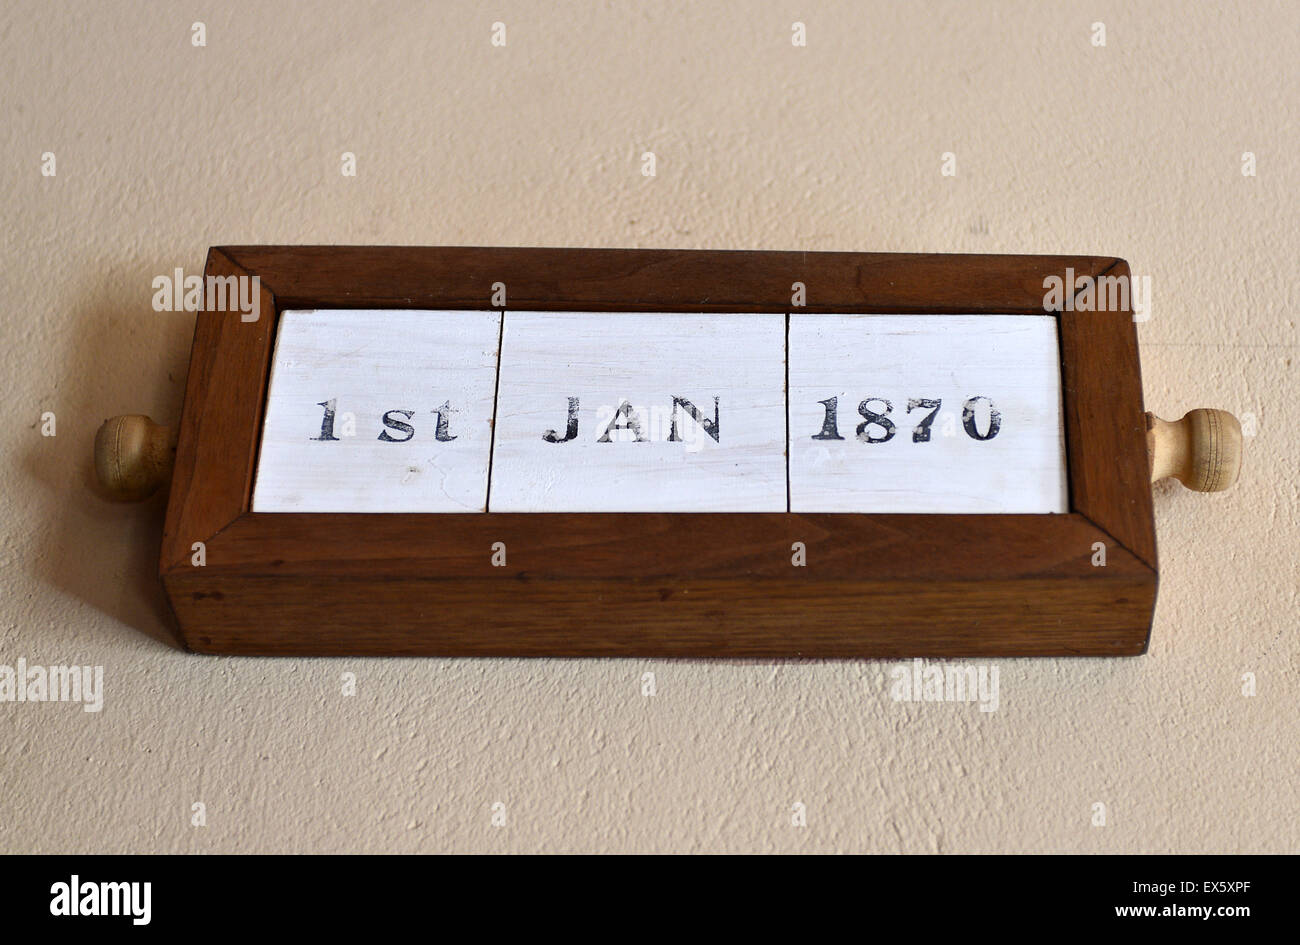 Old wooden vintage calendar showing the date 1st January 1870 Stock Photo